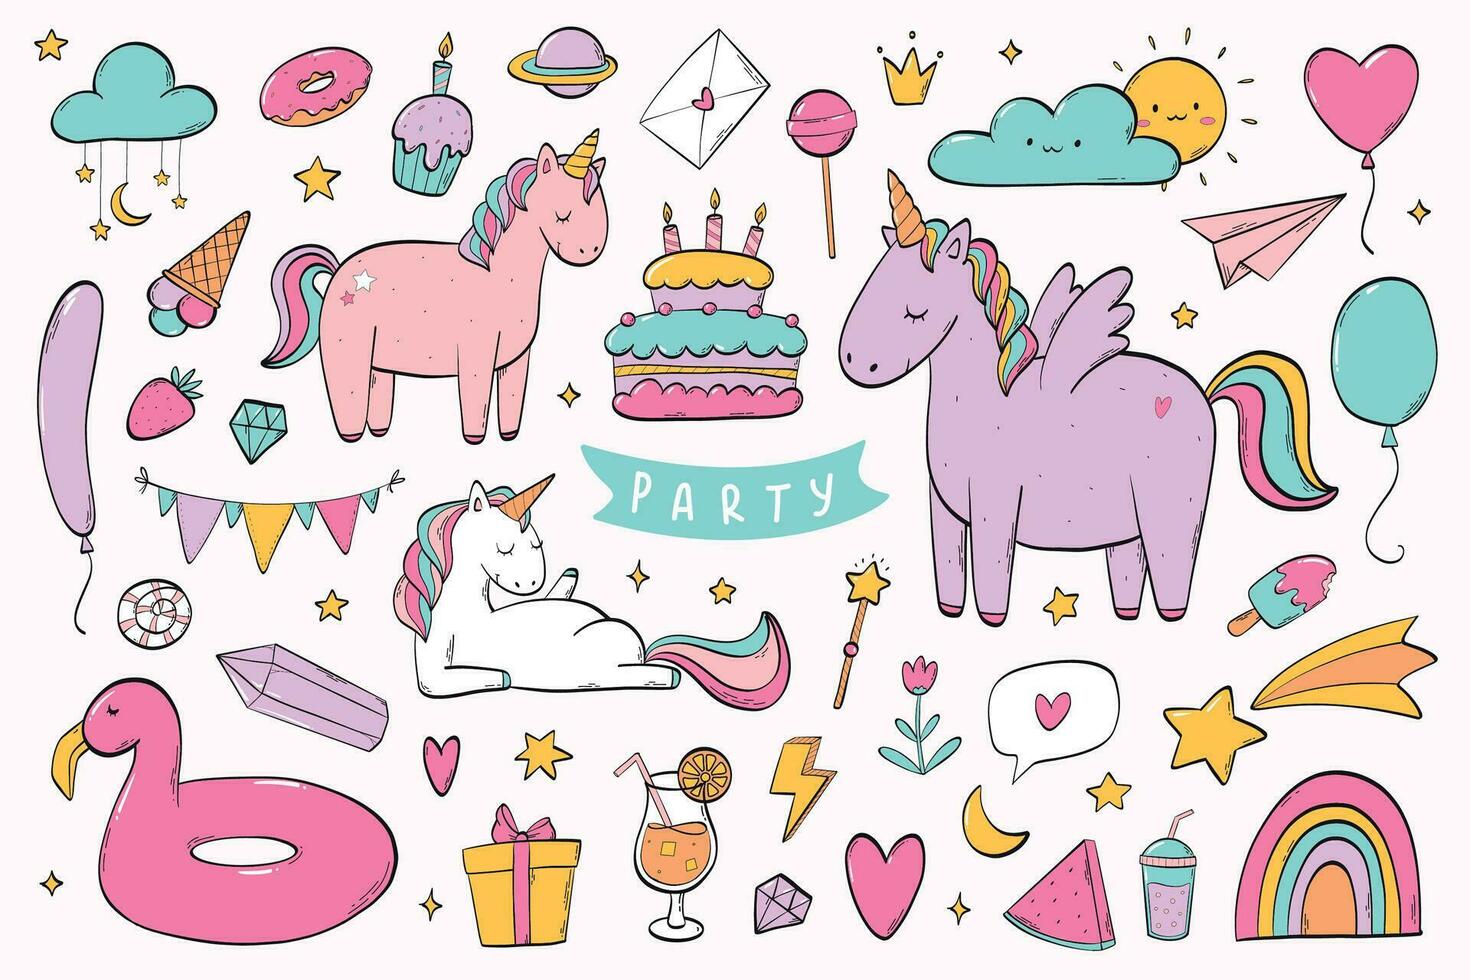 Set of cute hand drawn nursery and party doodles with cakes and unicorns isolated on white background for stickers, prints, cards and posters decor, sublimation, wallpaper, etc. EPS 10 vector